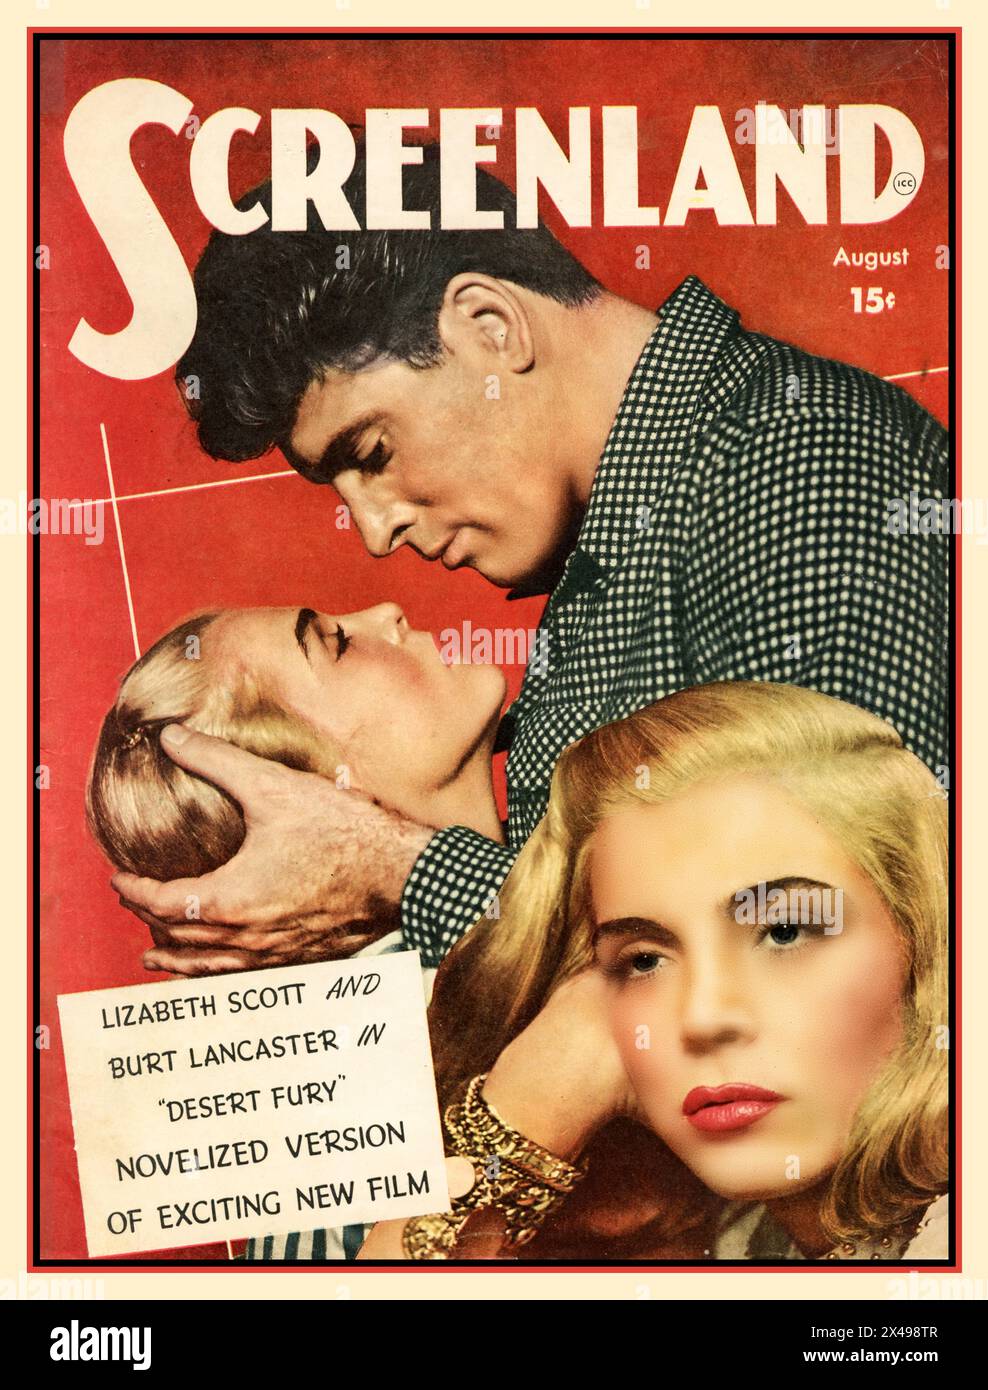 SCREENLAND 1947 Front Cover magazine promoting 'Desert Fury' a Hollywood Film Movie Starring Burt Lancaster and Lizabeth Scott . Desert Fury is a 1947 American film noir crime film directed by Lewis Allen, and starring John Hodiak, Lizabeth Scott and Burt Lancaster. Its plot follows the daughter of a casino owner in a small Nevada town who becomes involved with a racketeer who was once suspected of murdering his wife. The screenplay was written by Robert Rossen and A. I. Bezzerides,. The picture was produced by Hal Wallis, with music by Miklós Rózsa and cinematography in Technicolor Stock Photo